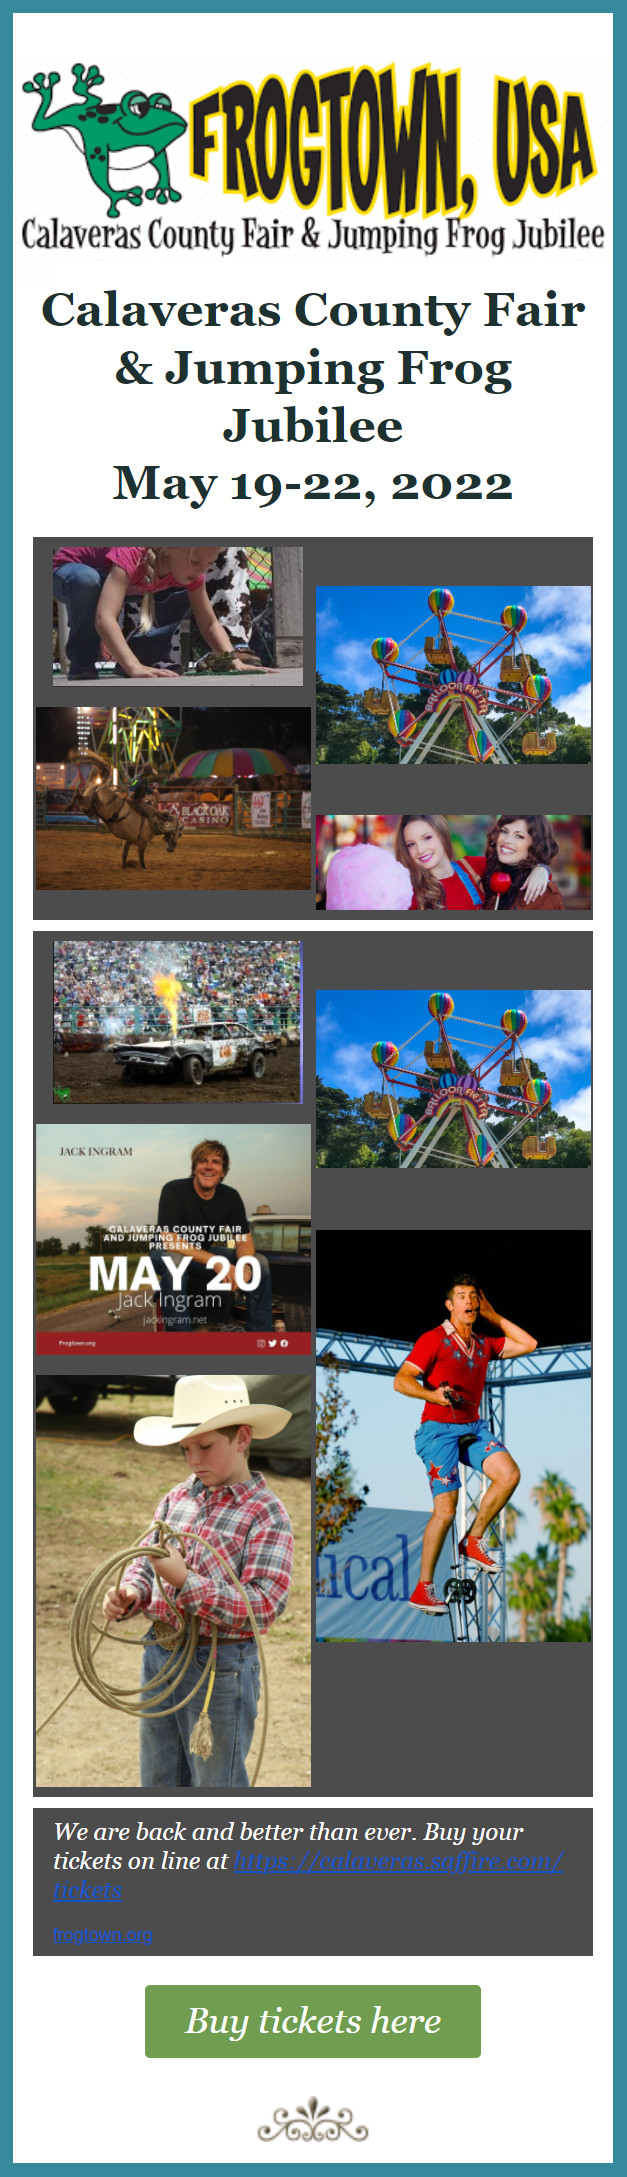 Calaveras County Fair and Jumping Frog Jubilee….We are back May 19-22, 2022